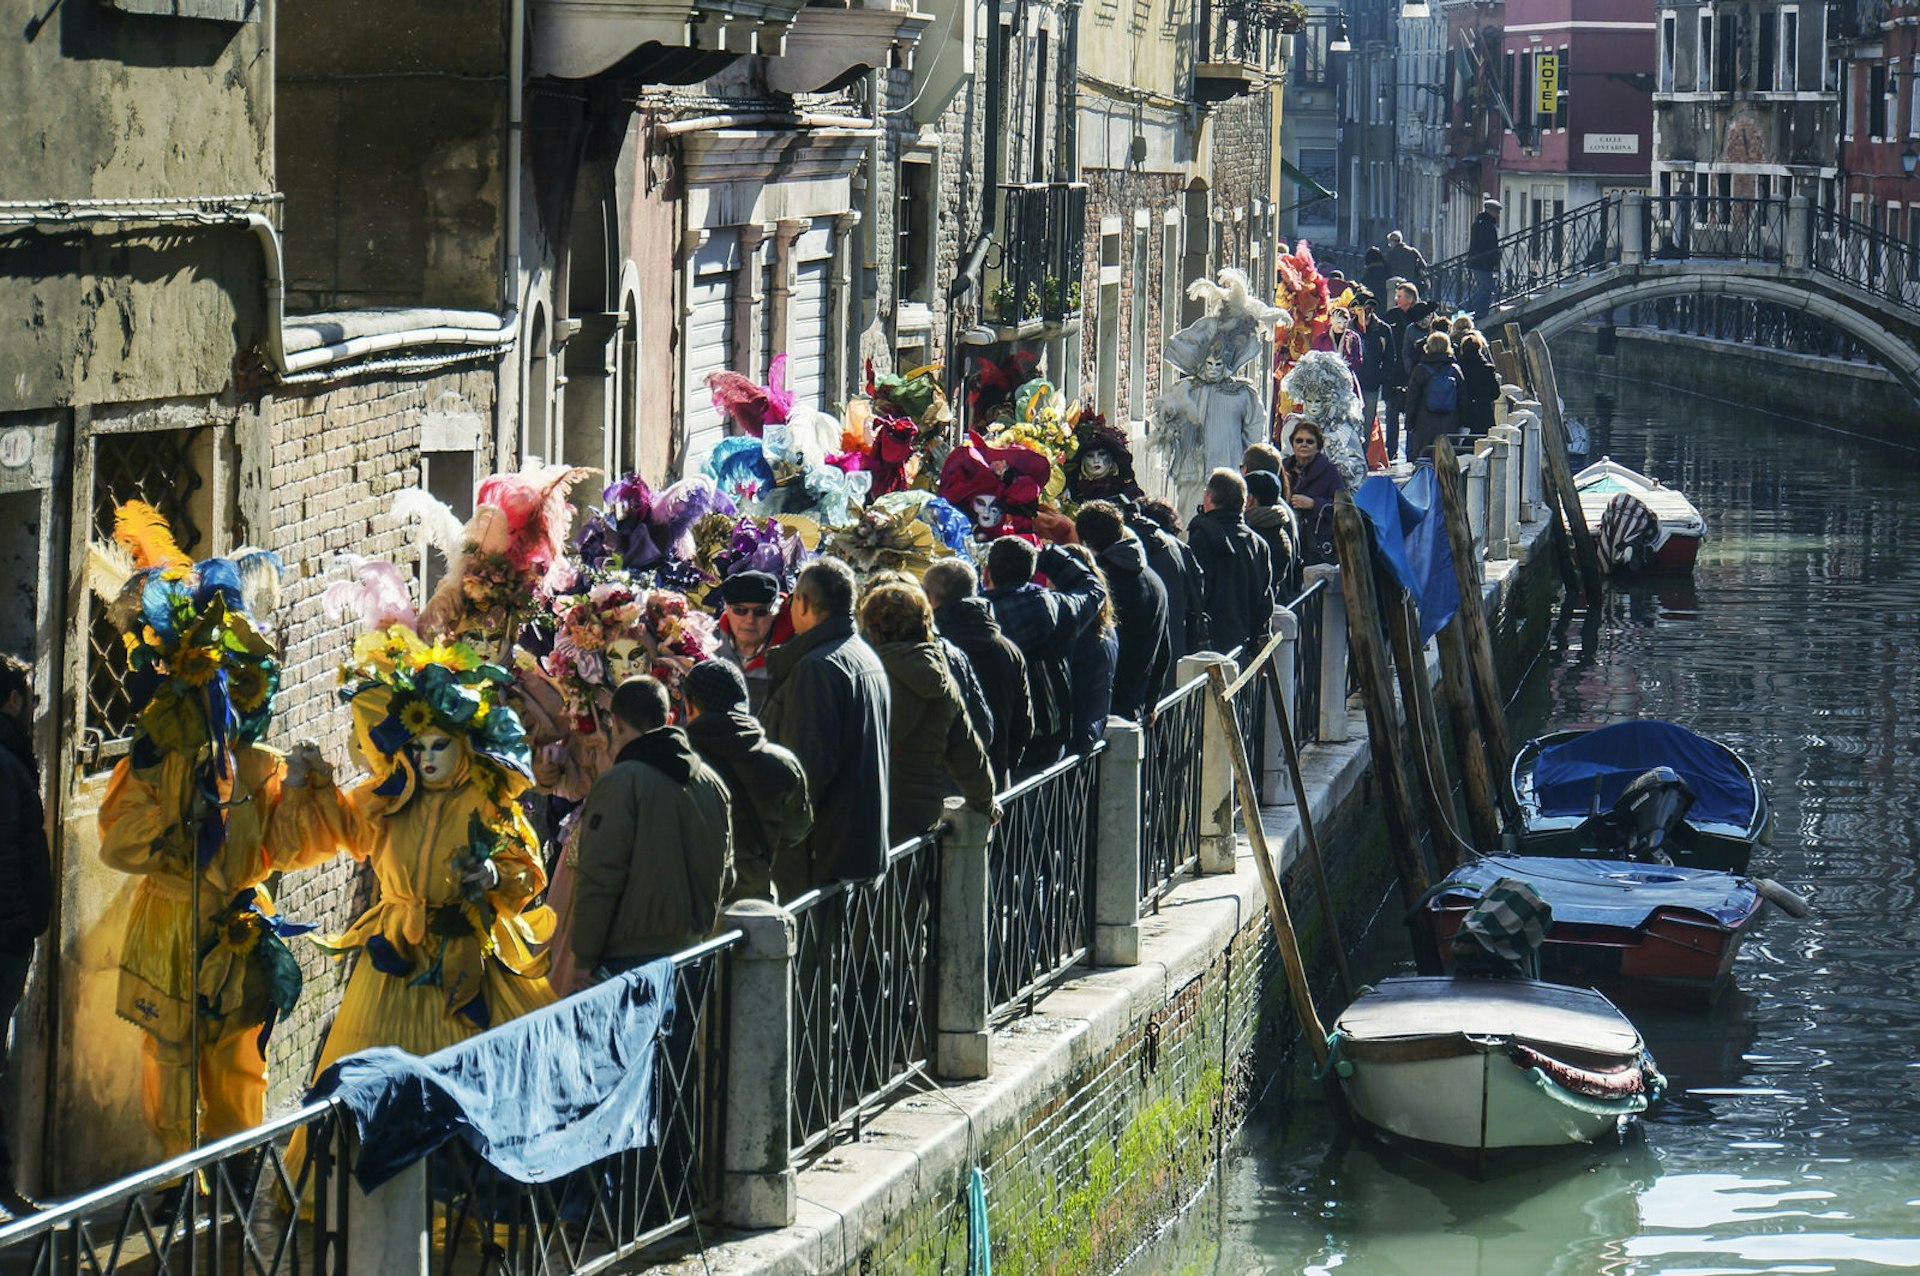 A procession of masked revellers making their way down a canal in Venice 